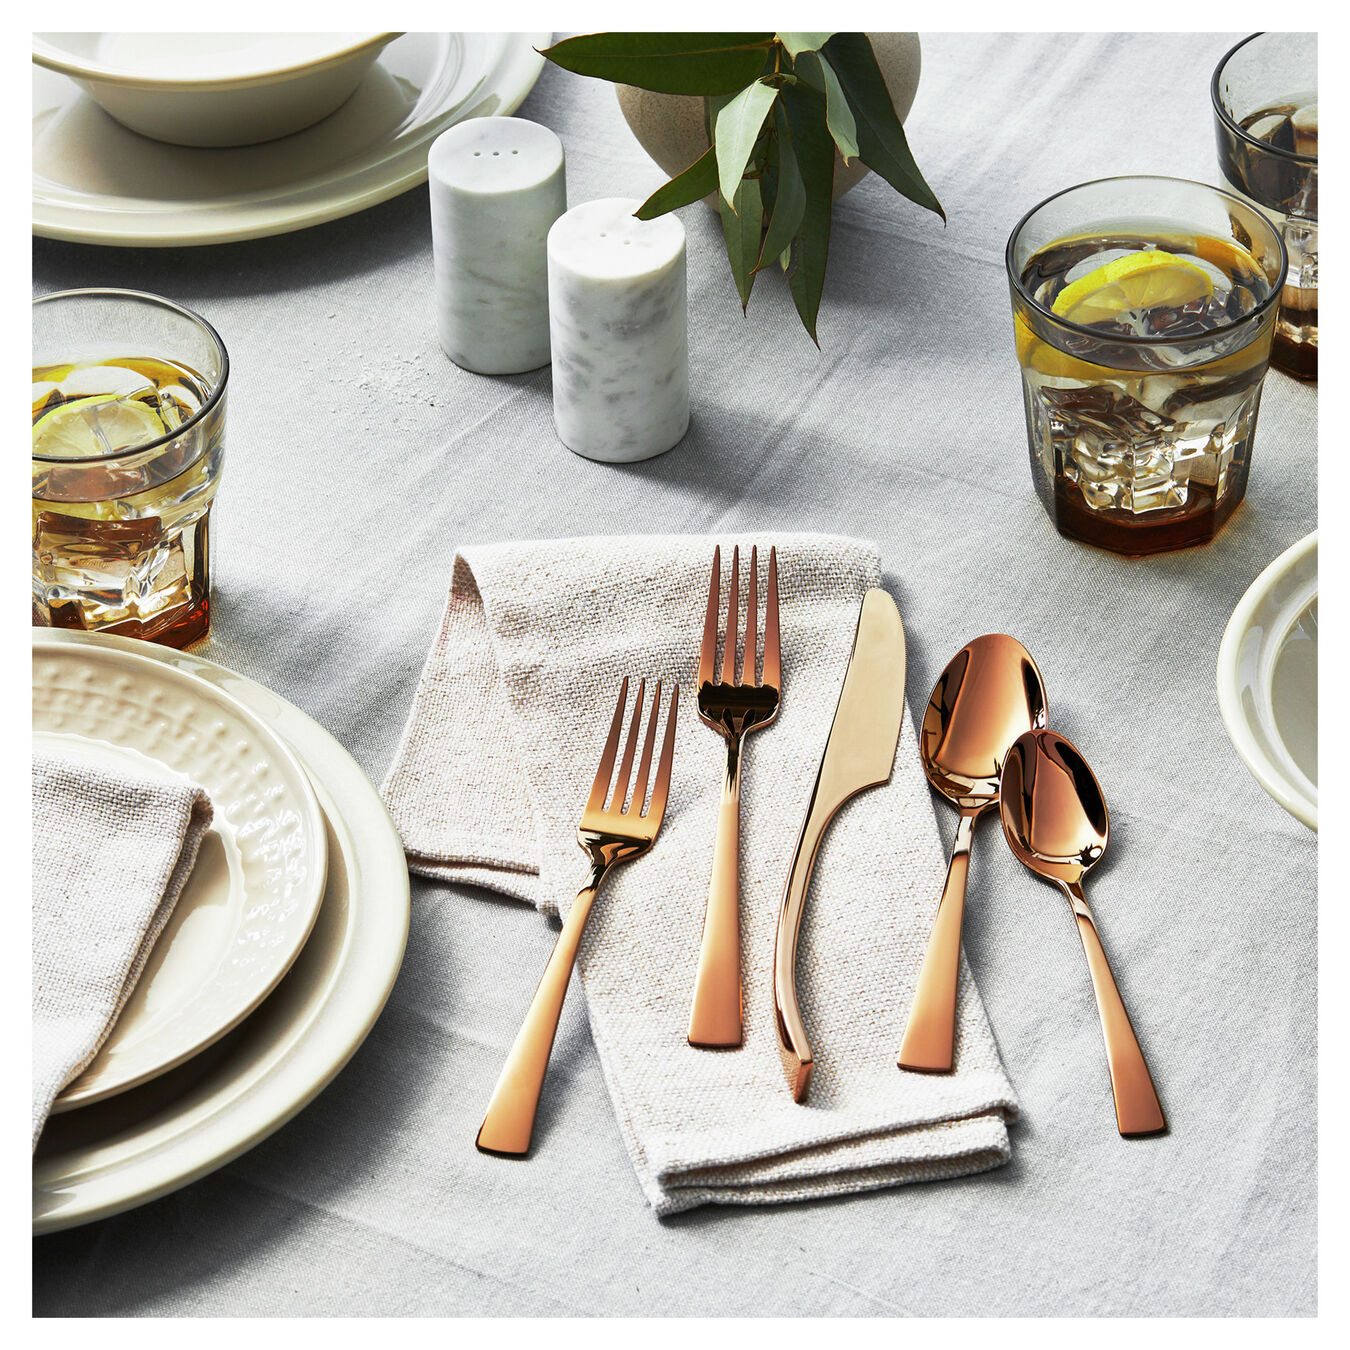 5 pieces of the bellasera gold flatware displayed on a table setting next to dinner plates, salt and pepper shaker, drinking glasses, and a vase with green sprigs on a white tablecloth 